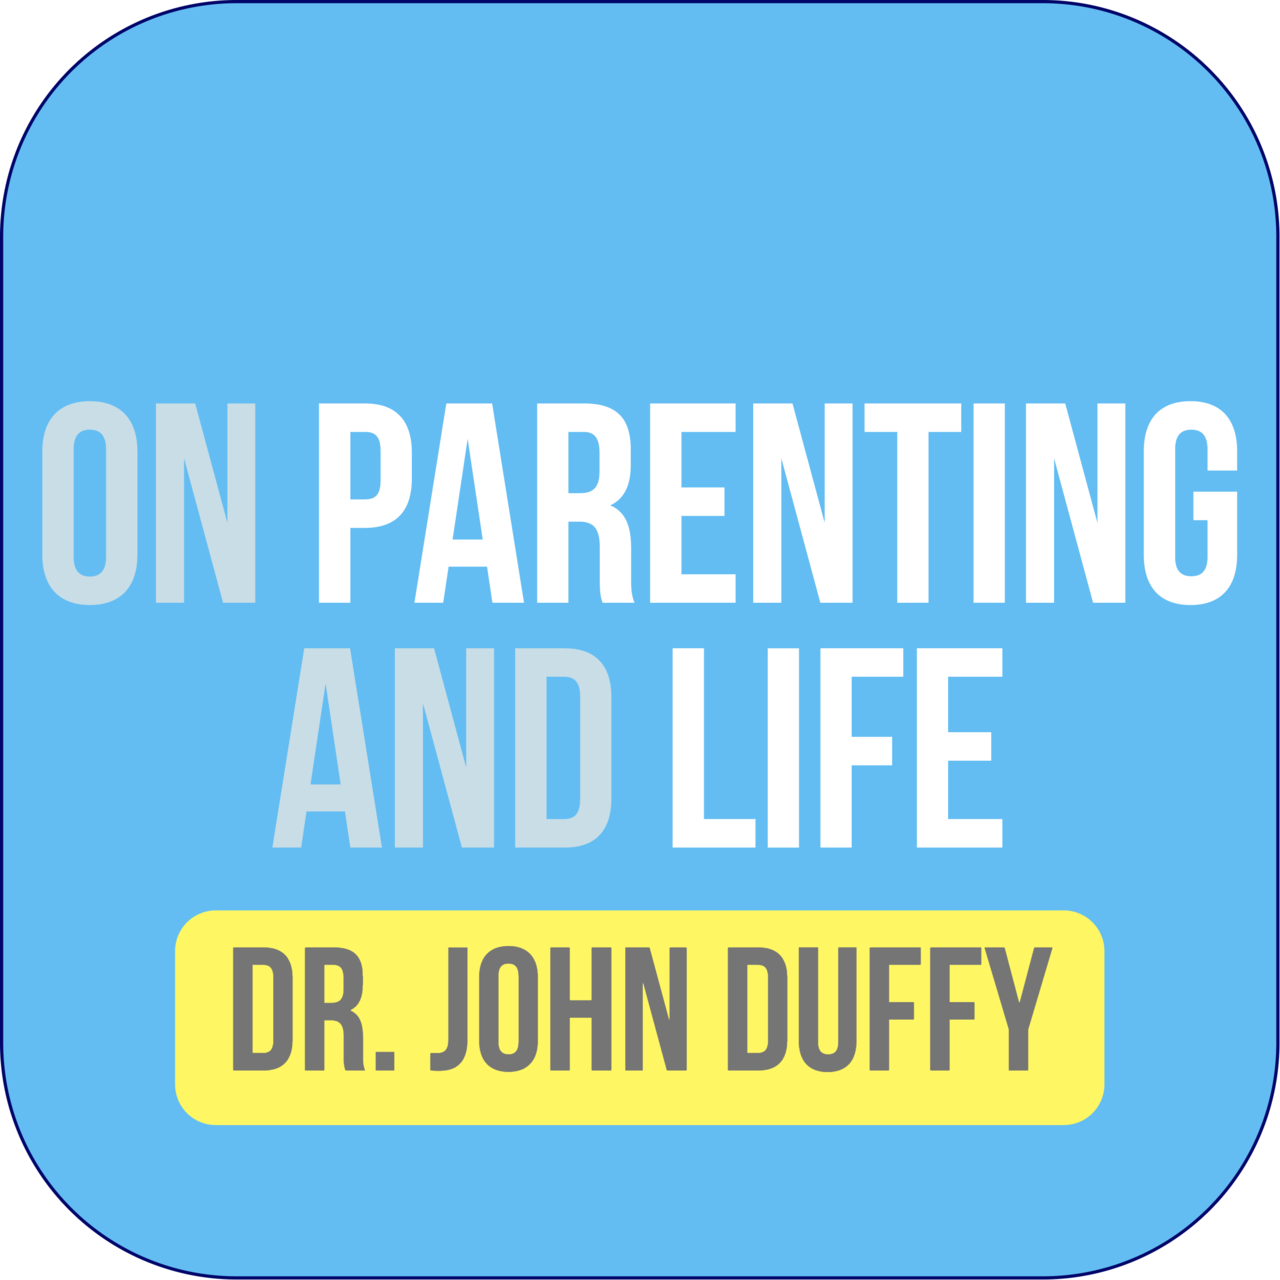 Artwork for On Parenting and Life